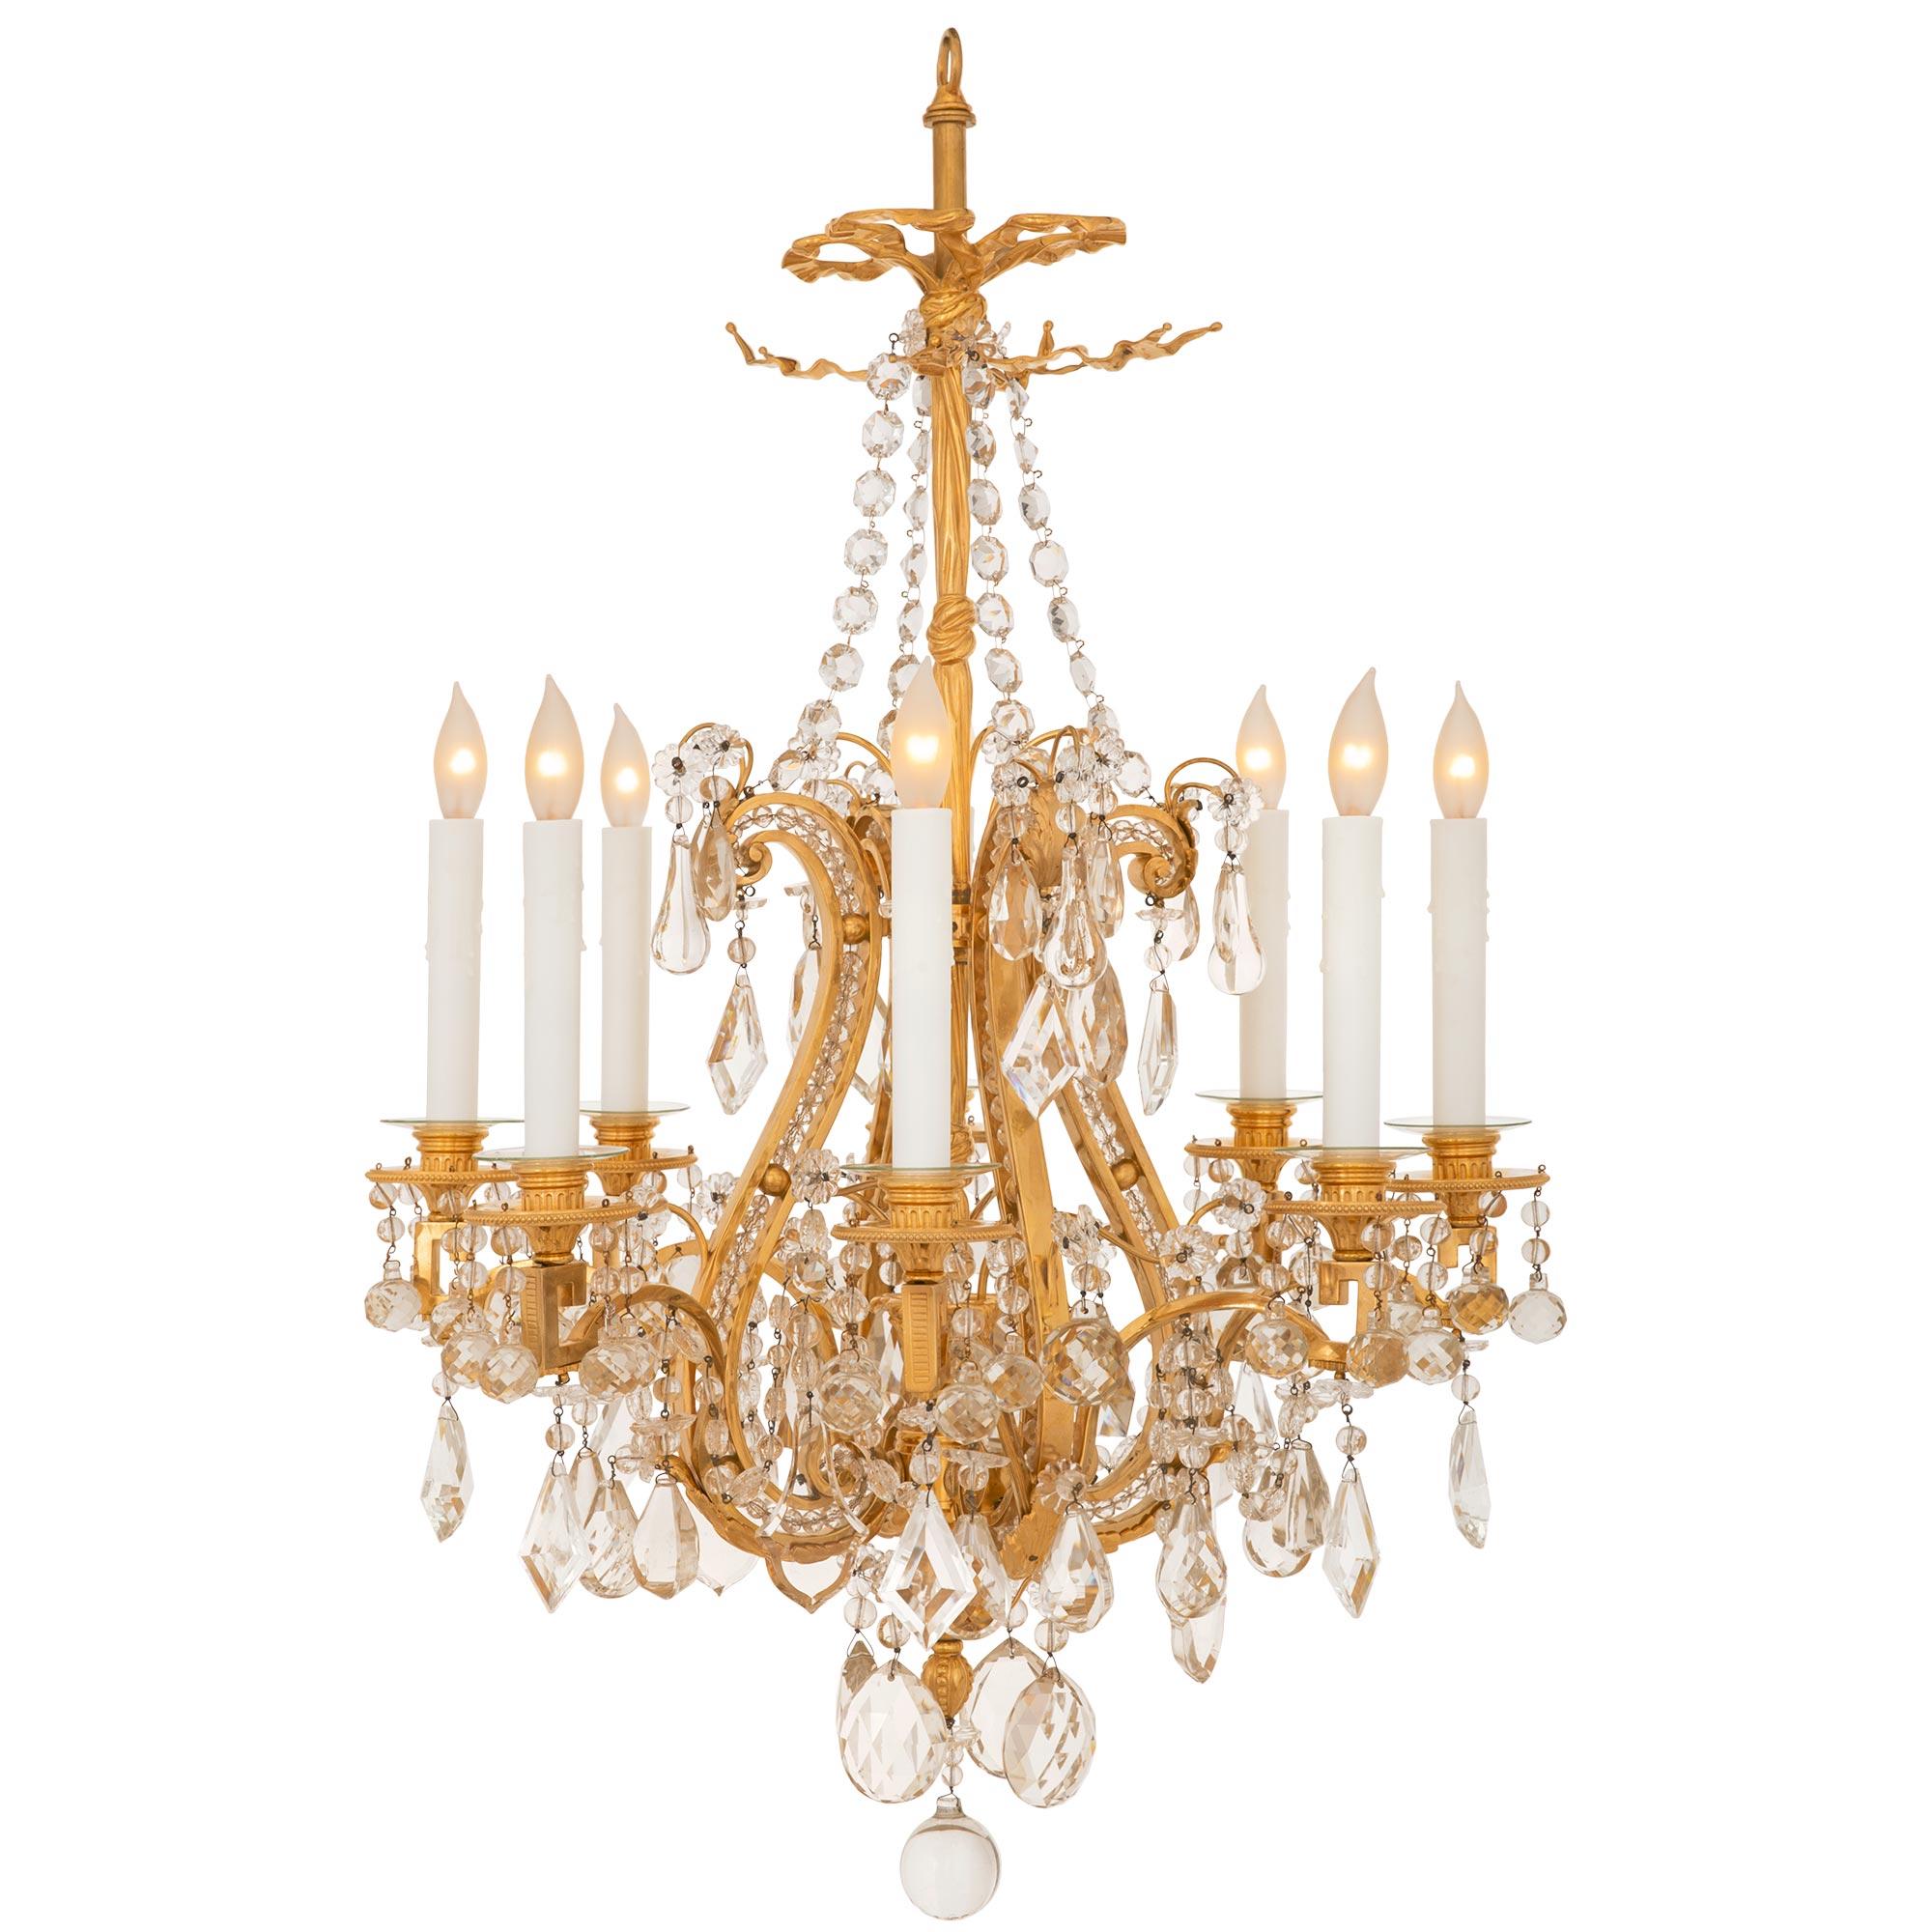 French 19th Century Louis XVI St. Ormolu and Baccarat Crystal Chandelier In Good Condition For Sale In West Palm Beach, FL